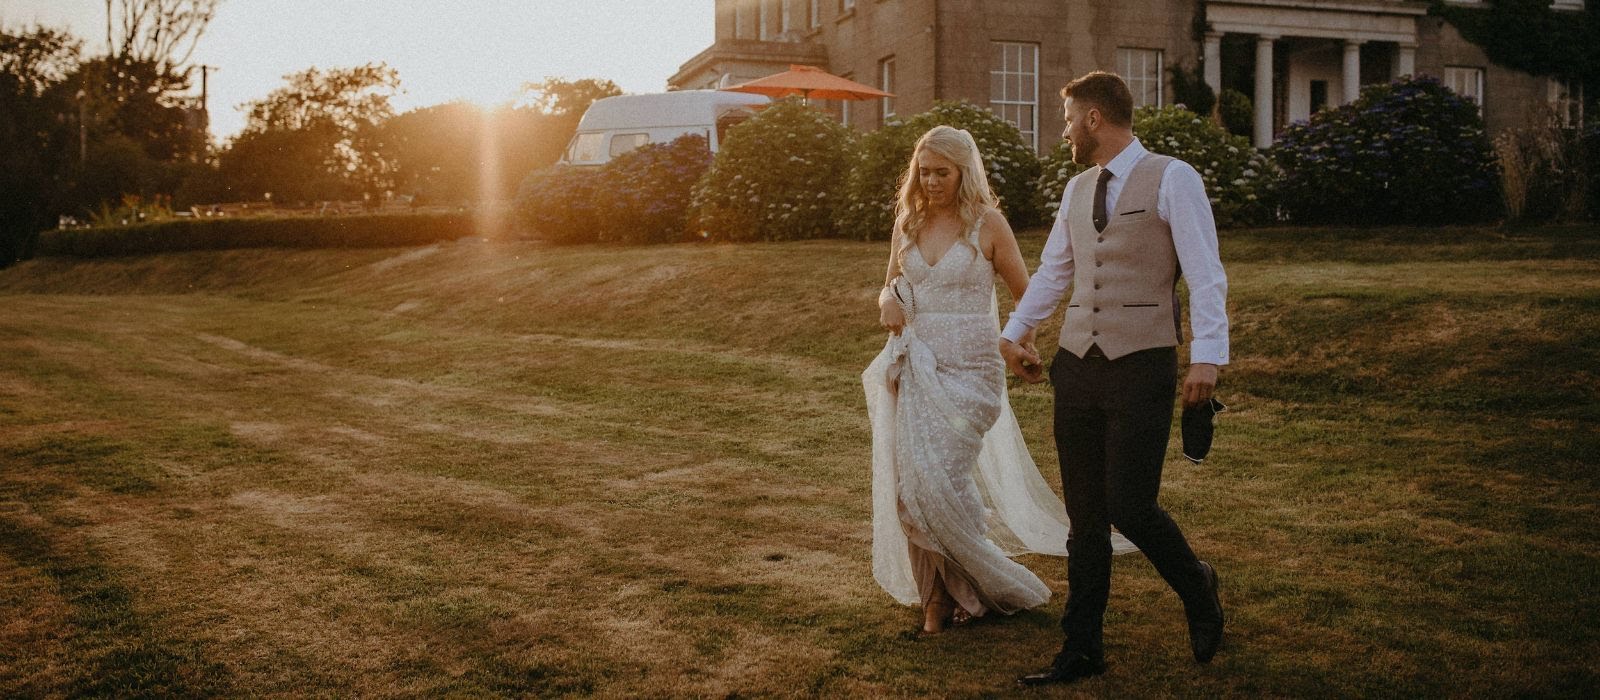 Stylish, sustainable, and tailored to you, this Wexford wedding venue should be on your radar